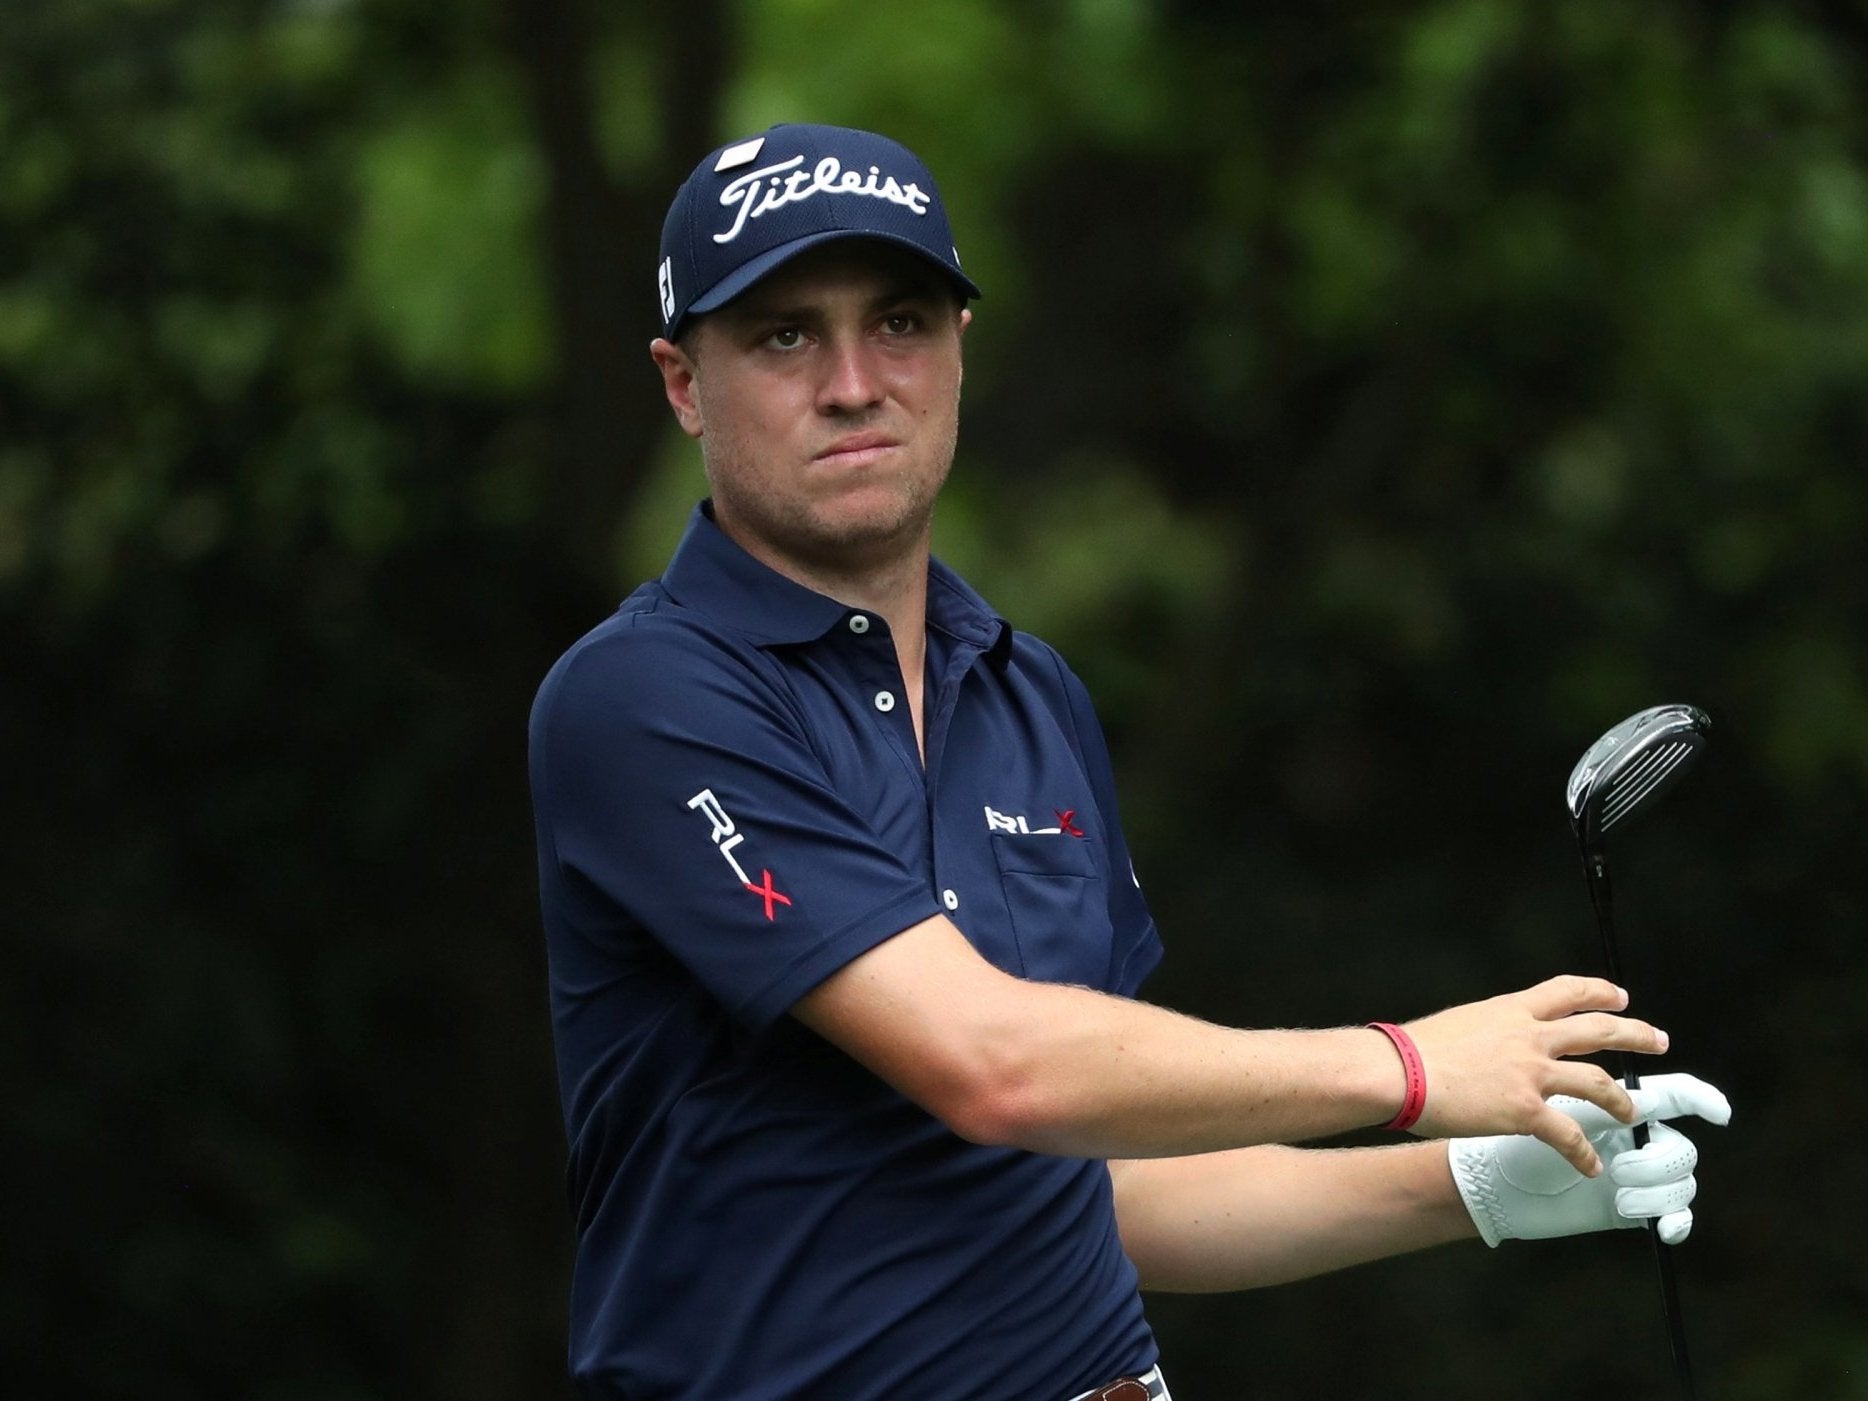 Justin Thomas has pulled out of the PGA Championship